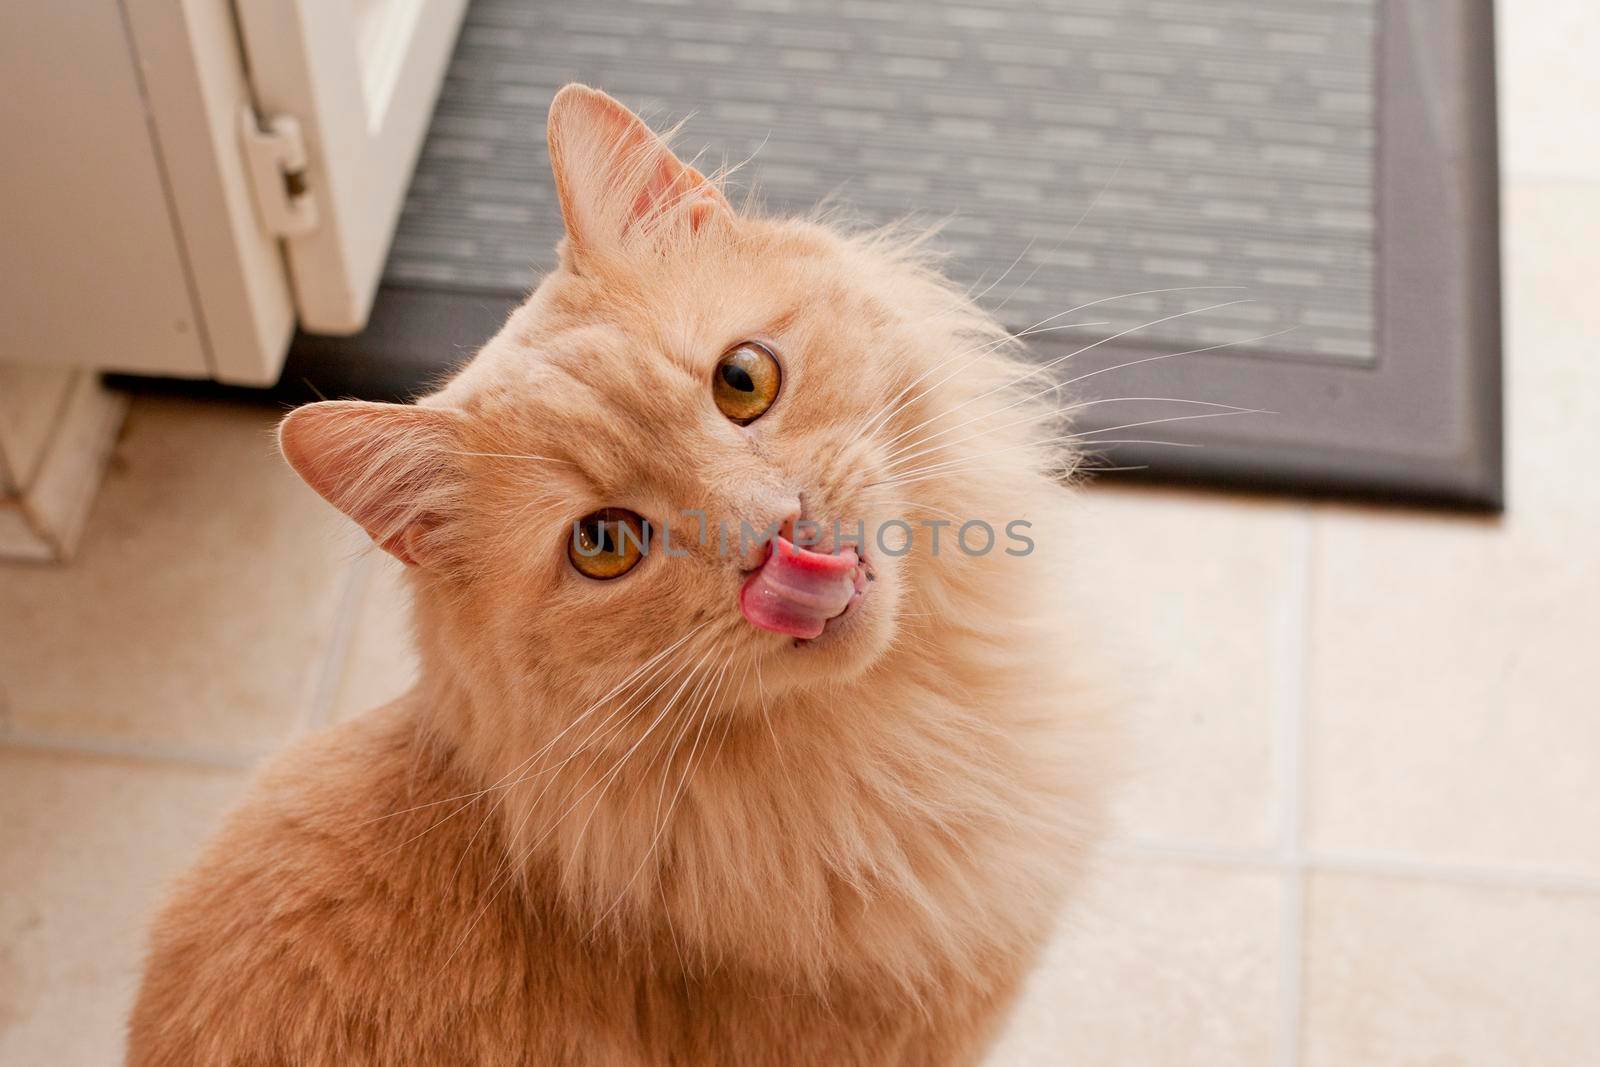 A cat seems to be mocking you, sticking its tongue out